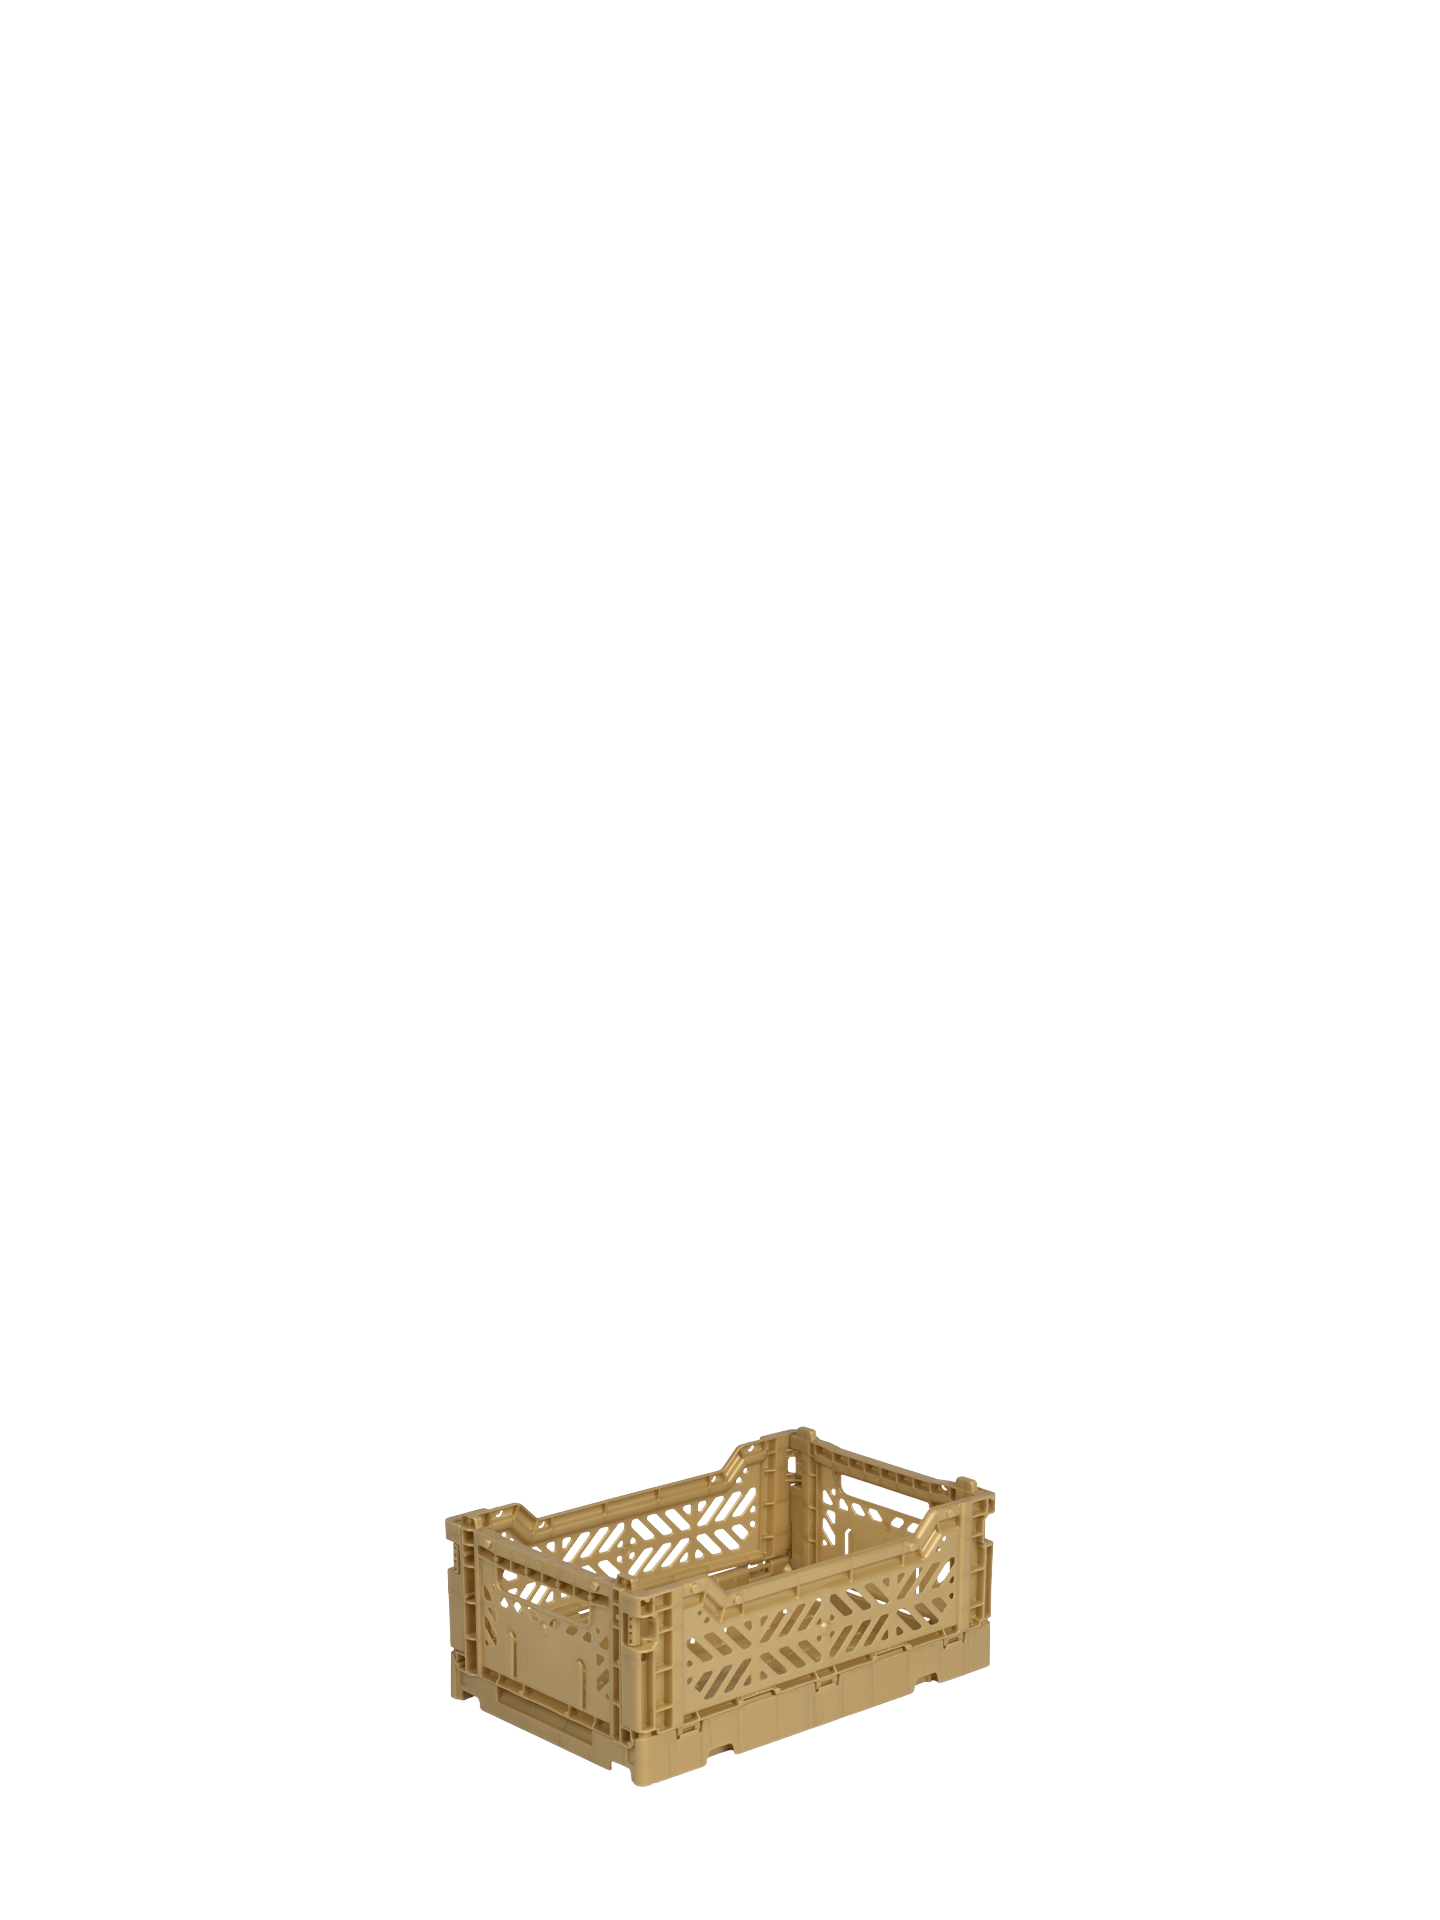 Mini Aykasa crate in gold stacks and folds